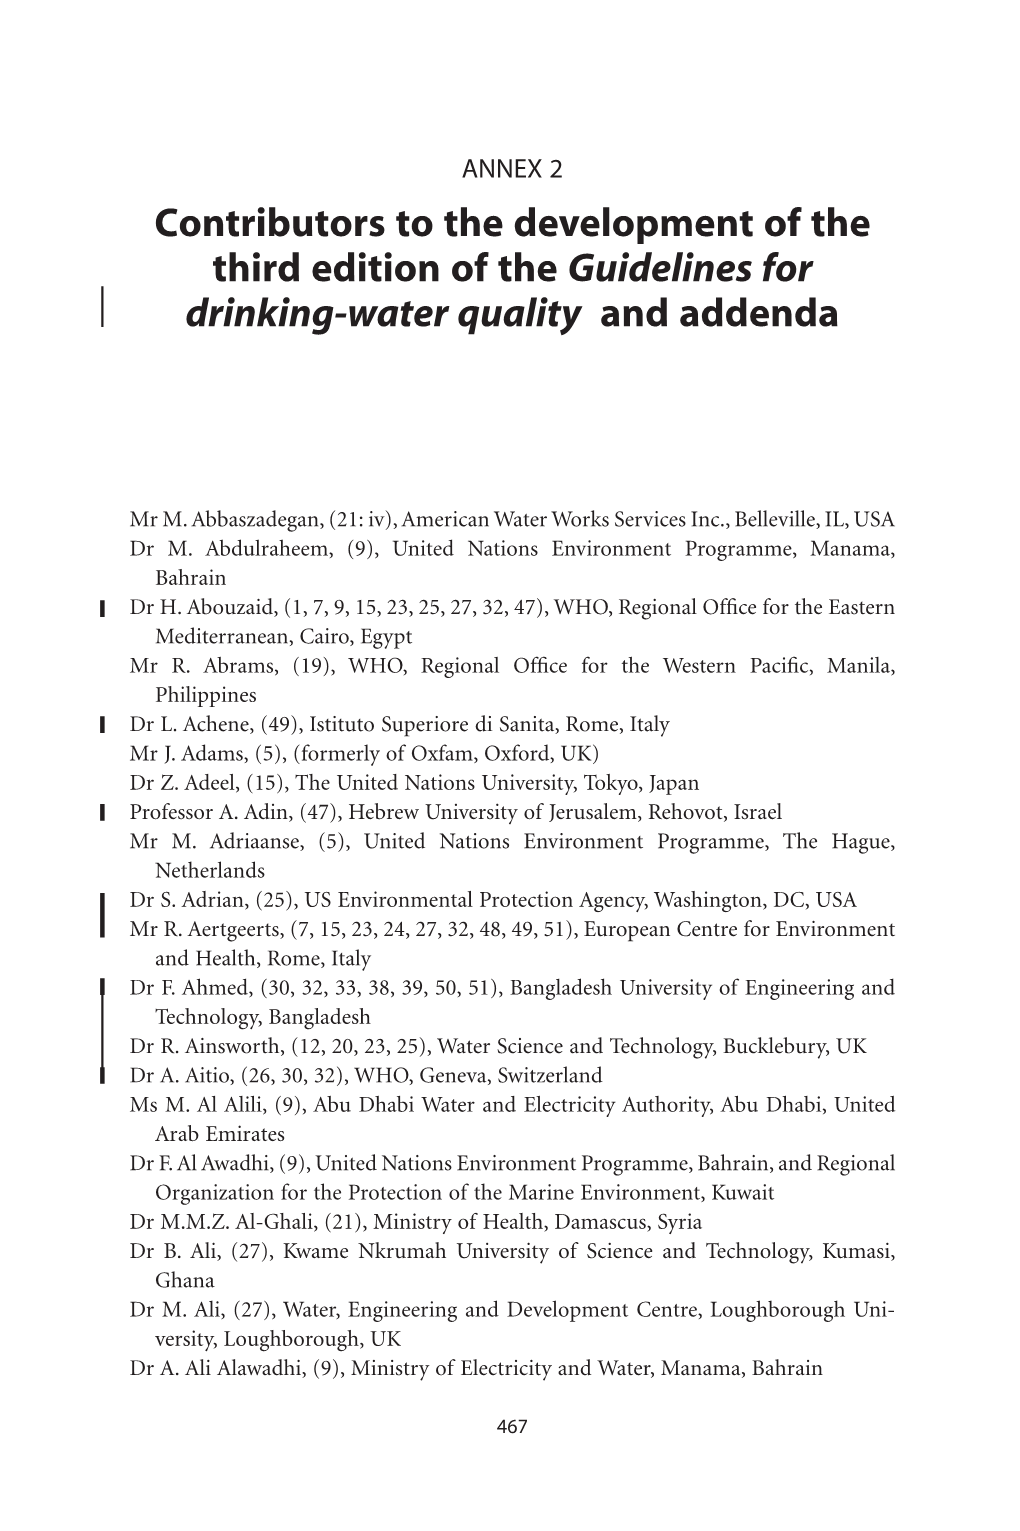 Contributors to the Development of the Third Edition of the Guidelines for Drinking-Water Quality and Addenda